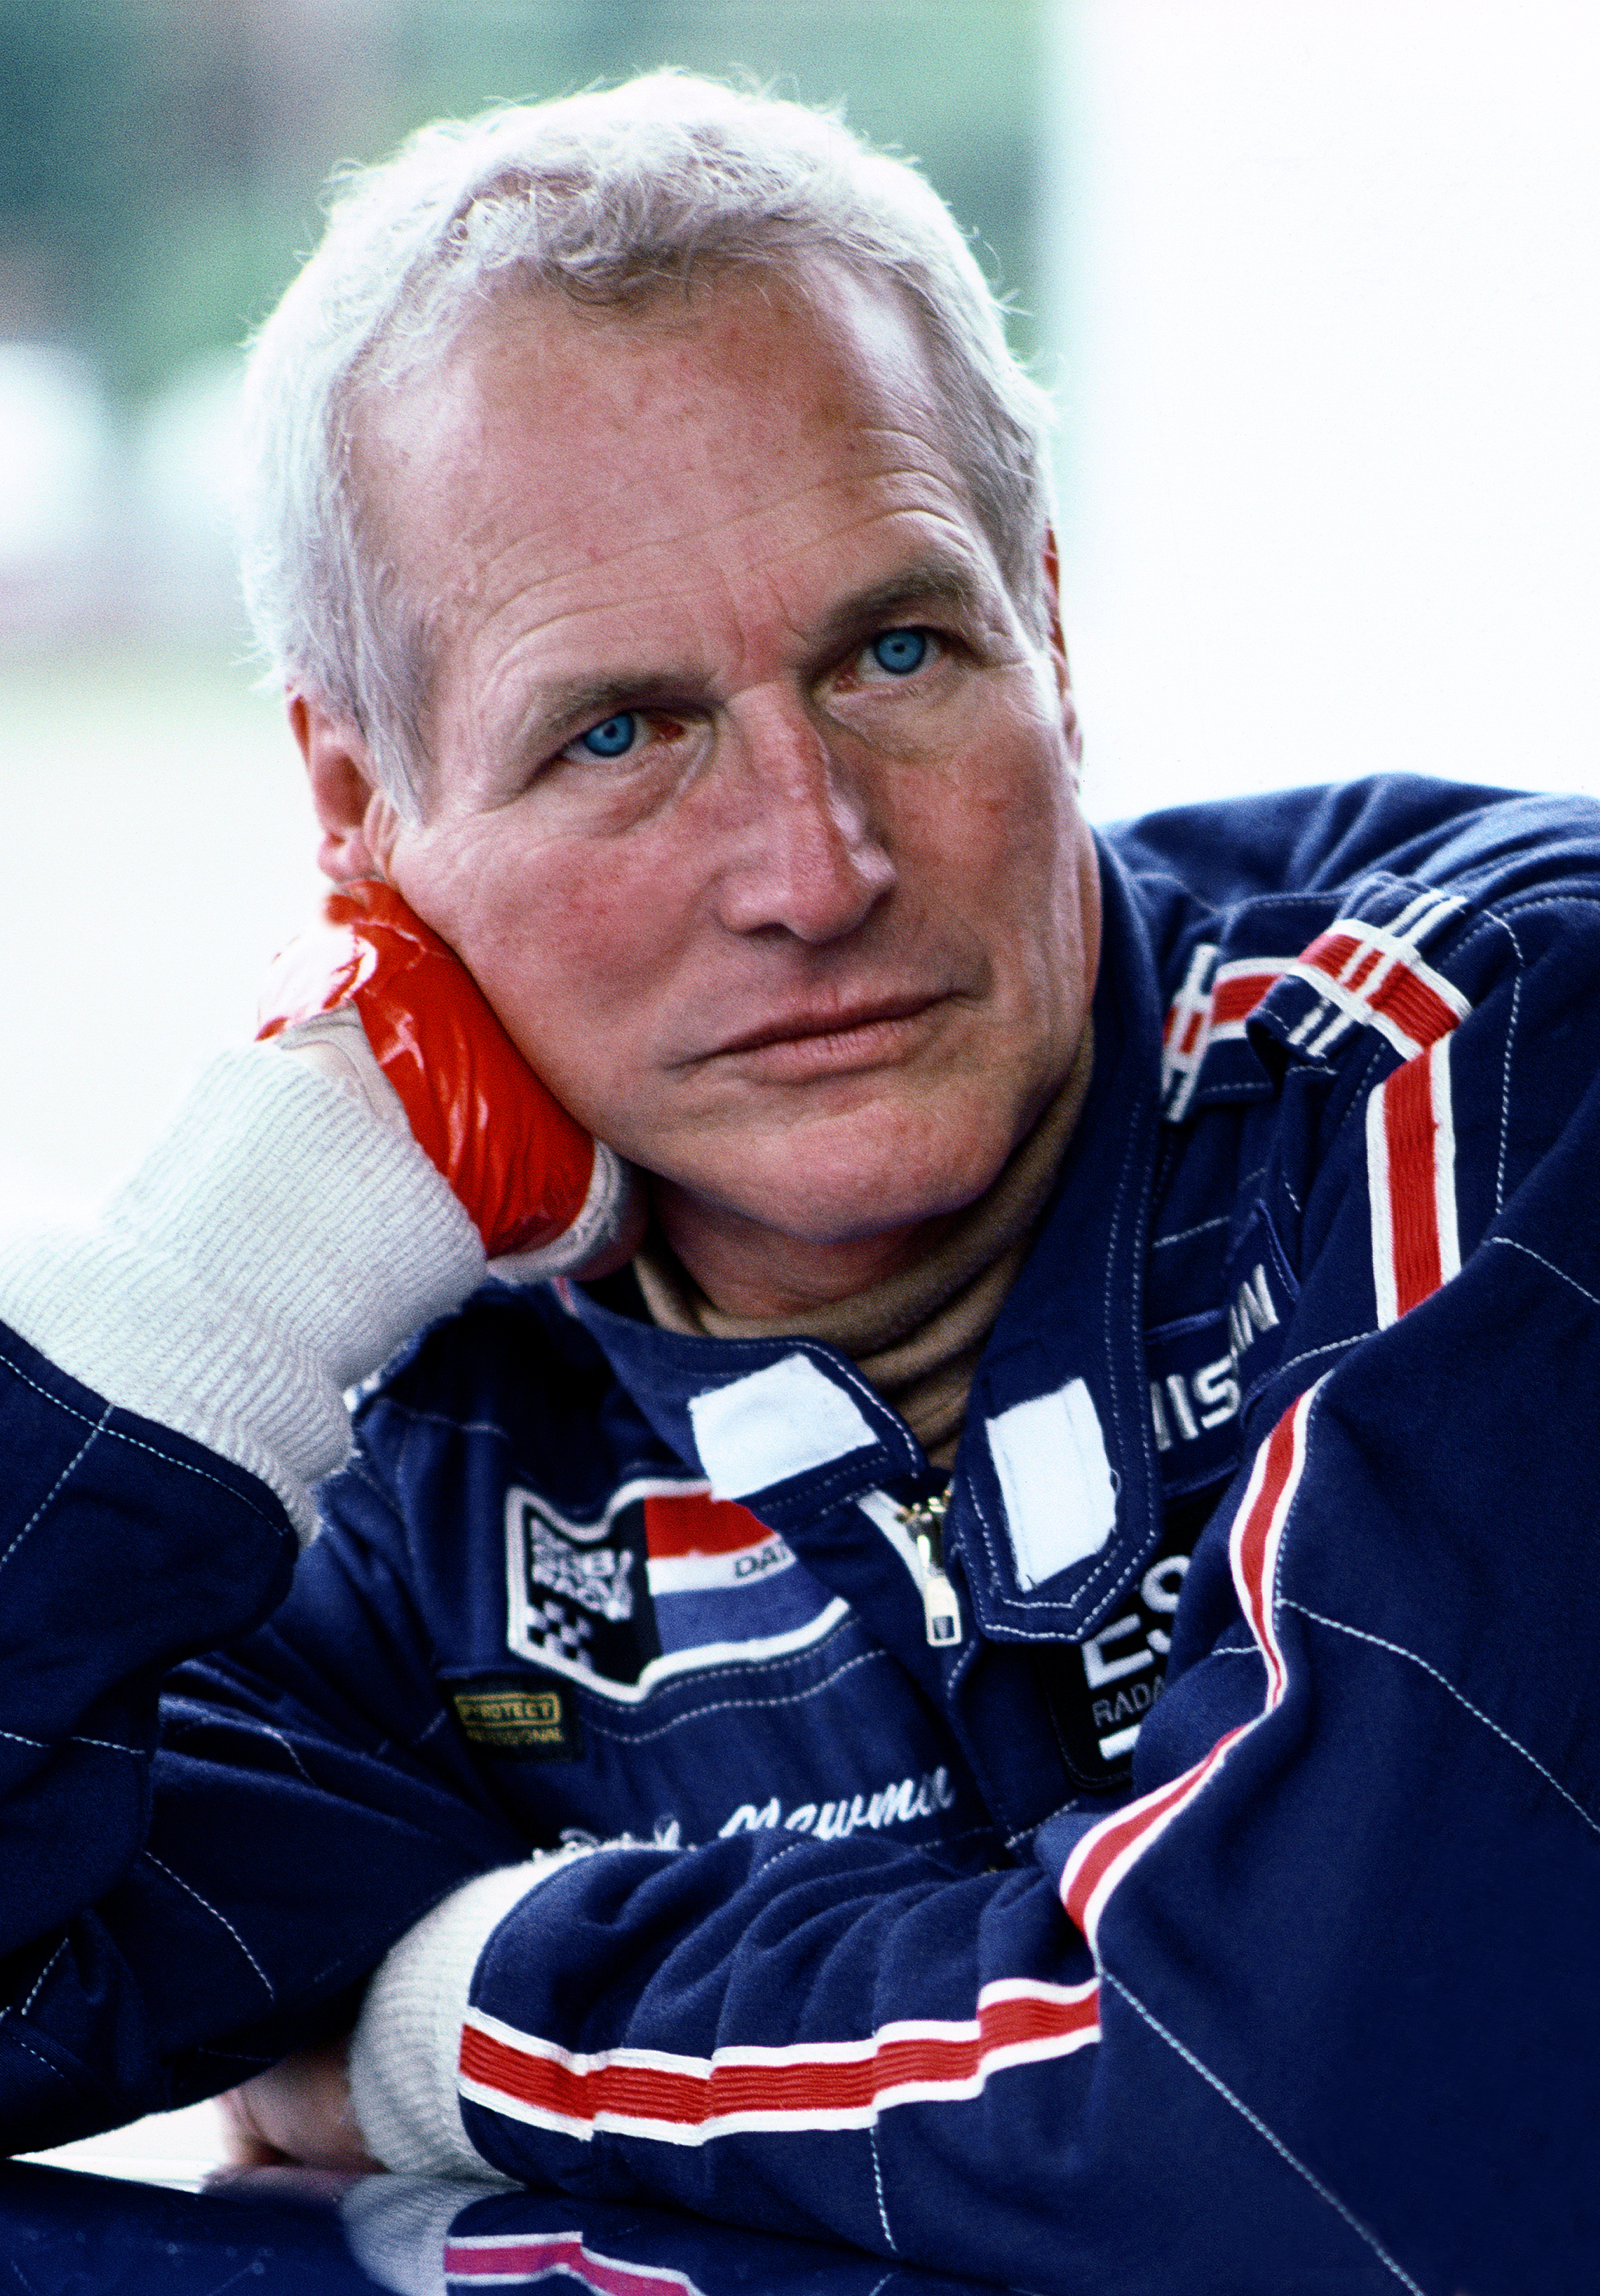 Close-up of Paul in a racing uniform